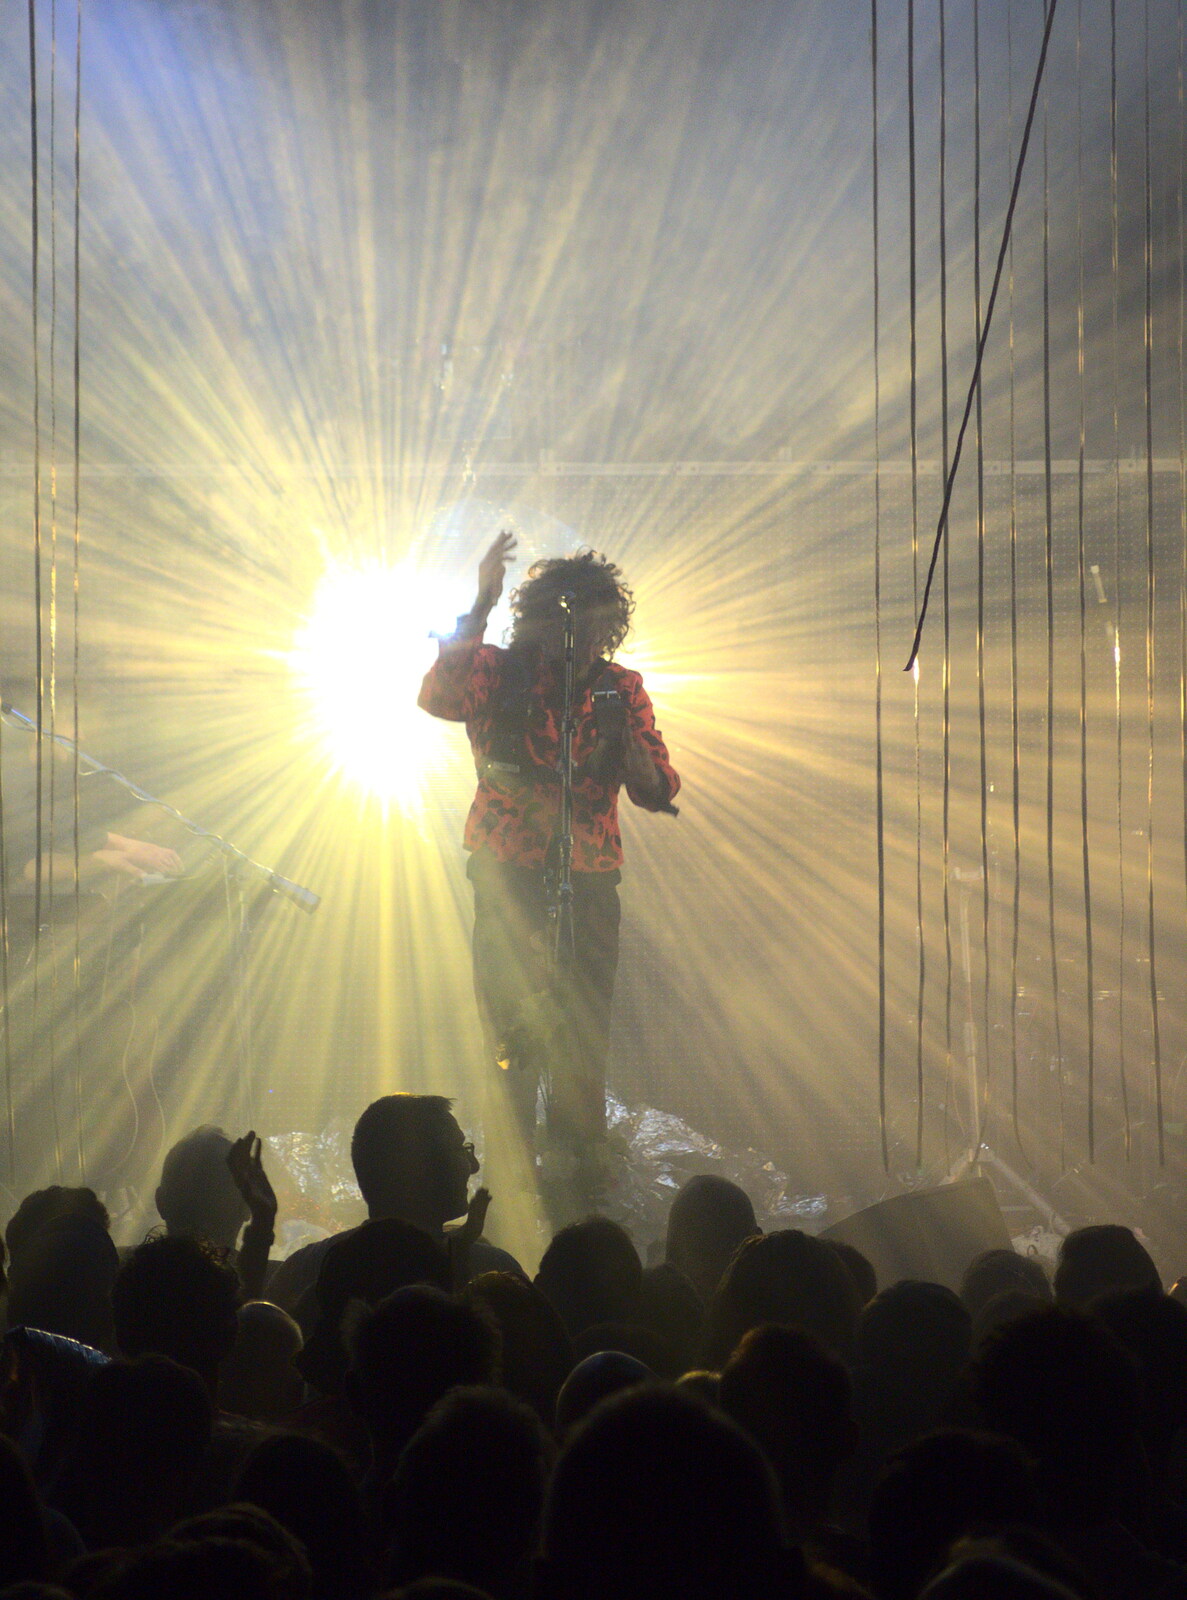 Backlit and back on stage from Flaming Lips at the UEA, Norwich, Norfolk - 26th June 2017